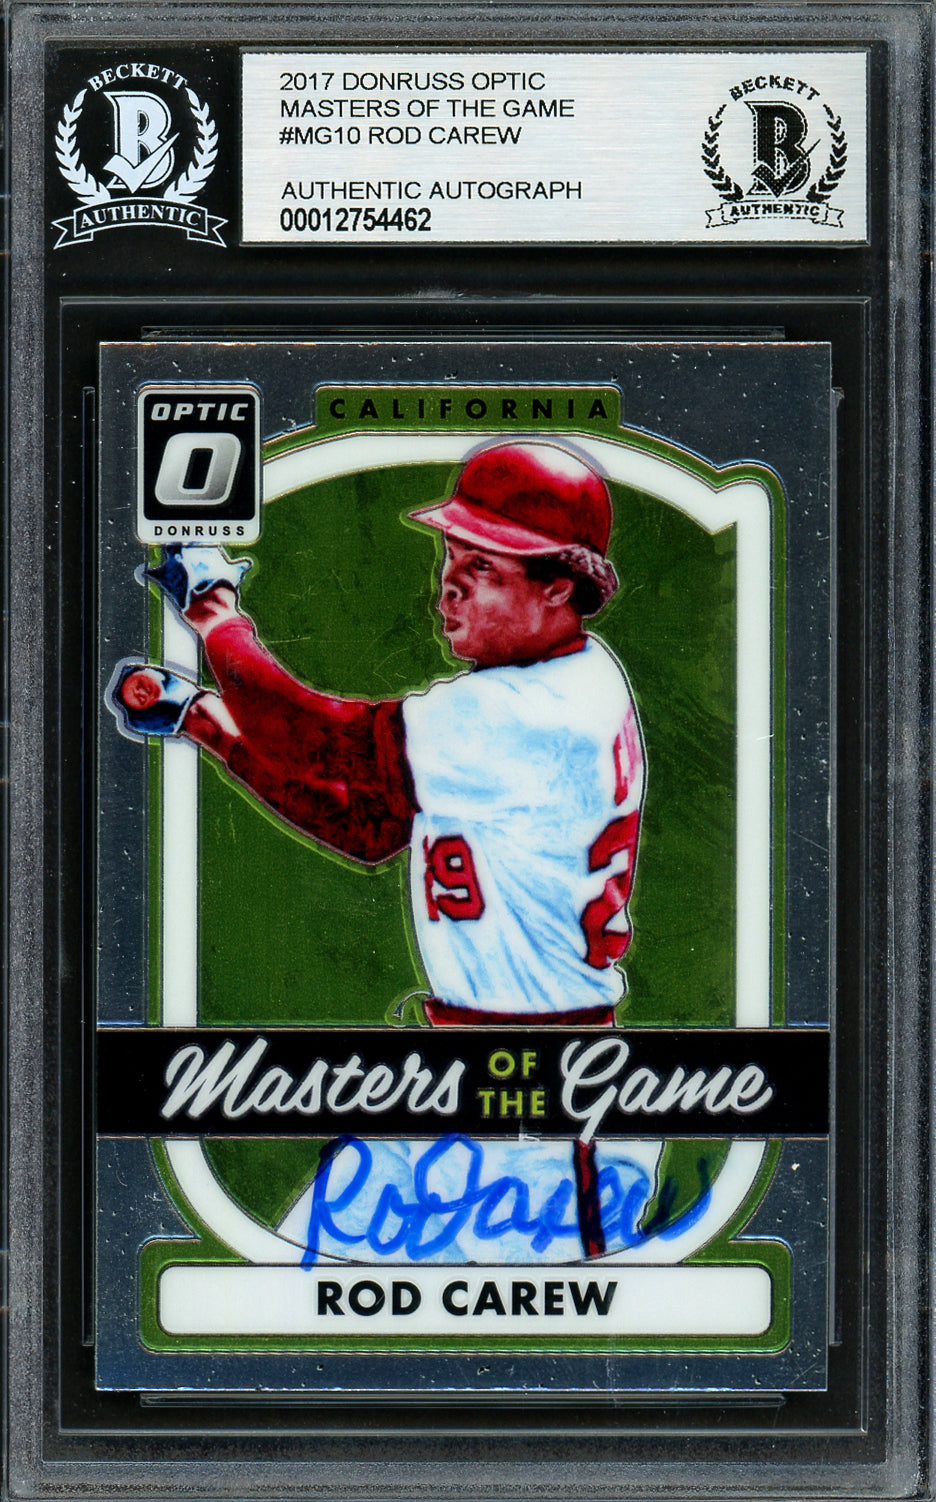 Rod Carew Autographed 2017 Donruss Optic Masters of the Game Card #MG10 California Angels Beckett BAS #12754462